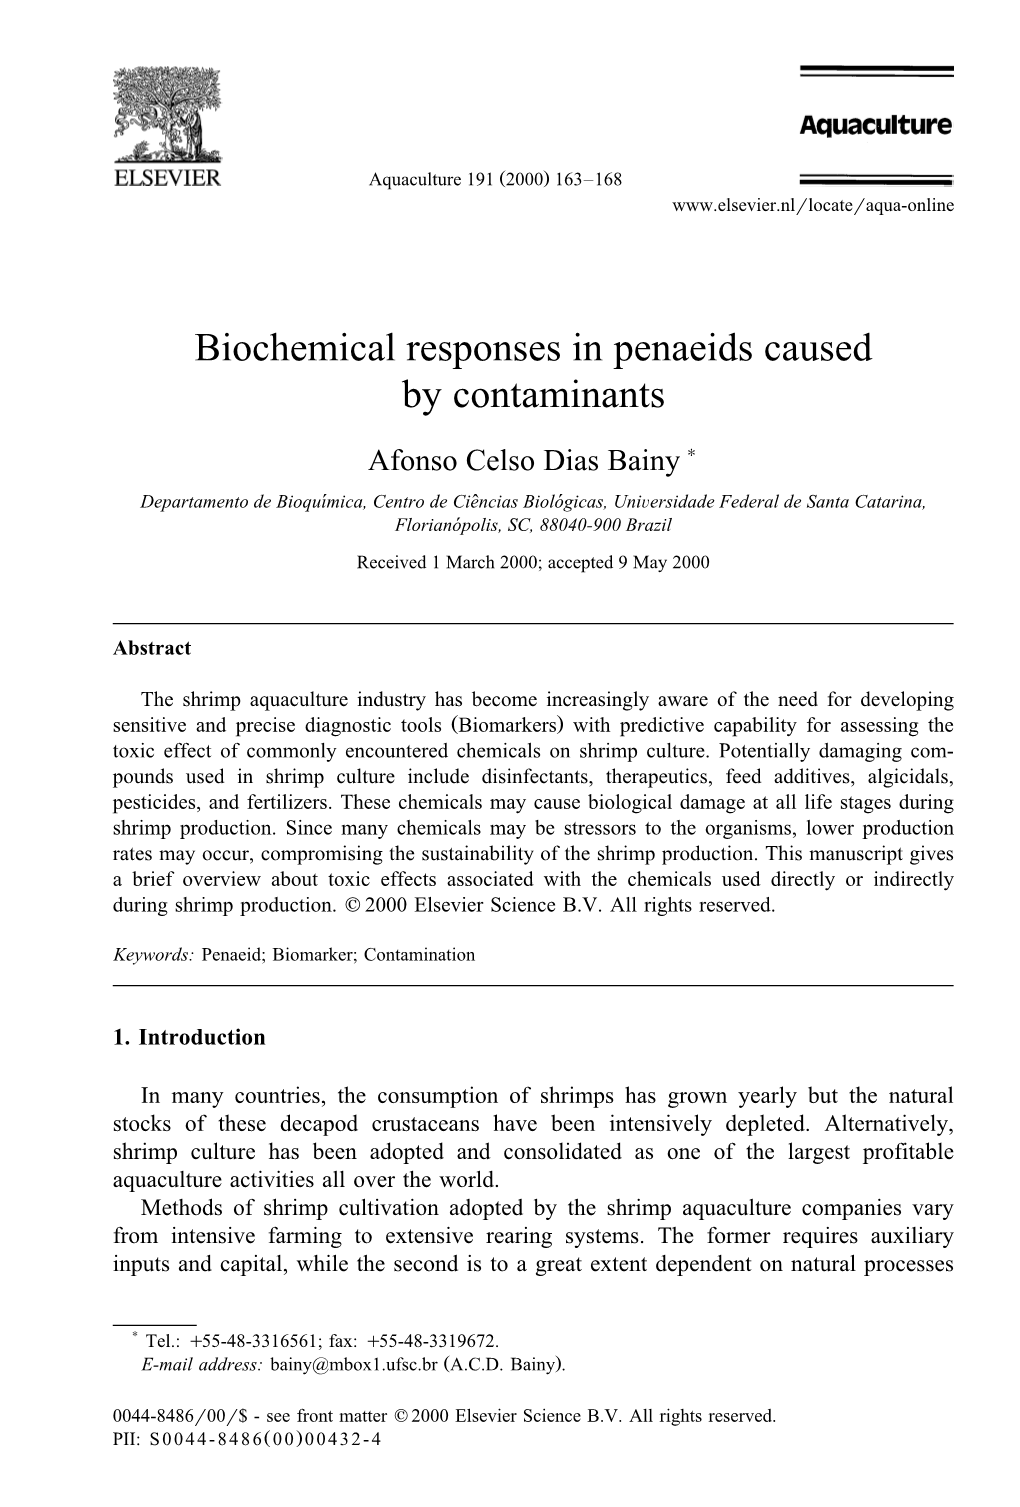 Biochemical Responses in Penaeids Caused by Contaminants